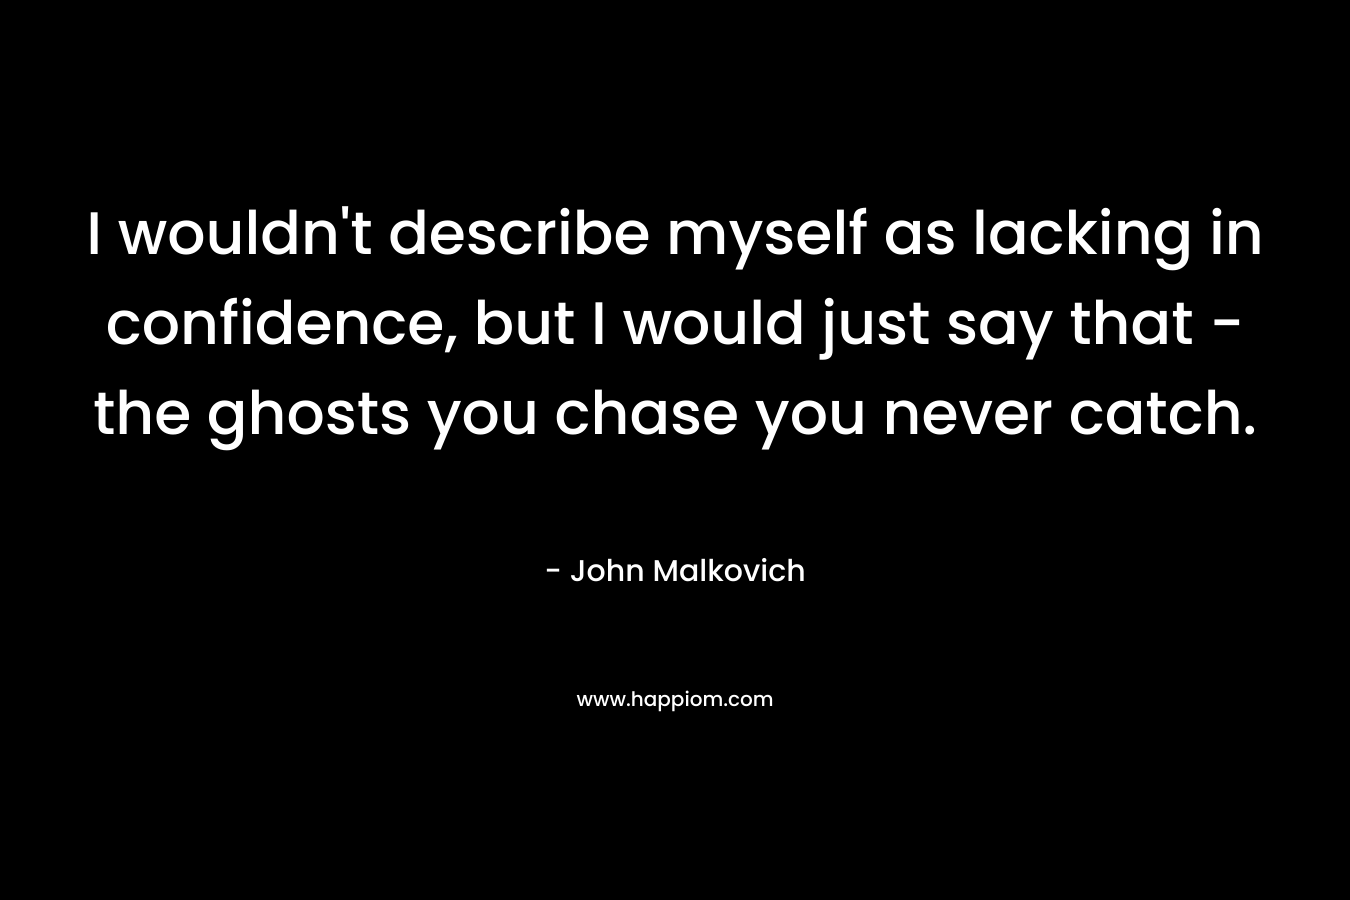 I wouldn't describe myself as lacking in confidence, but I would just say that - the ghosts you chase you never catch.